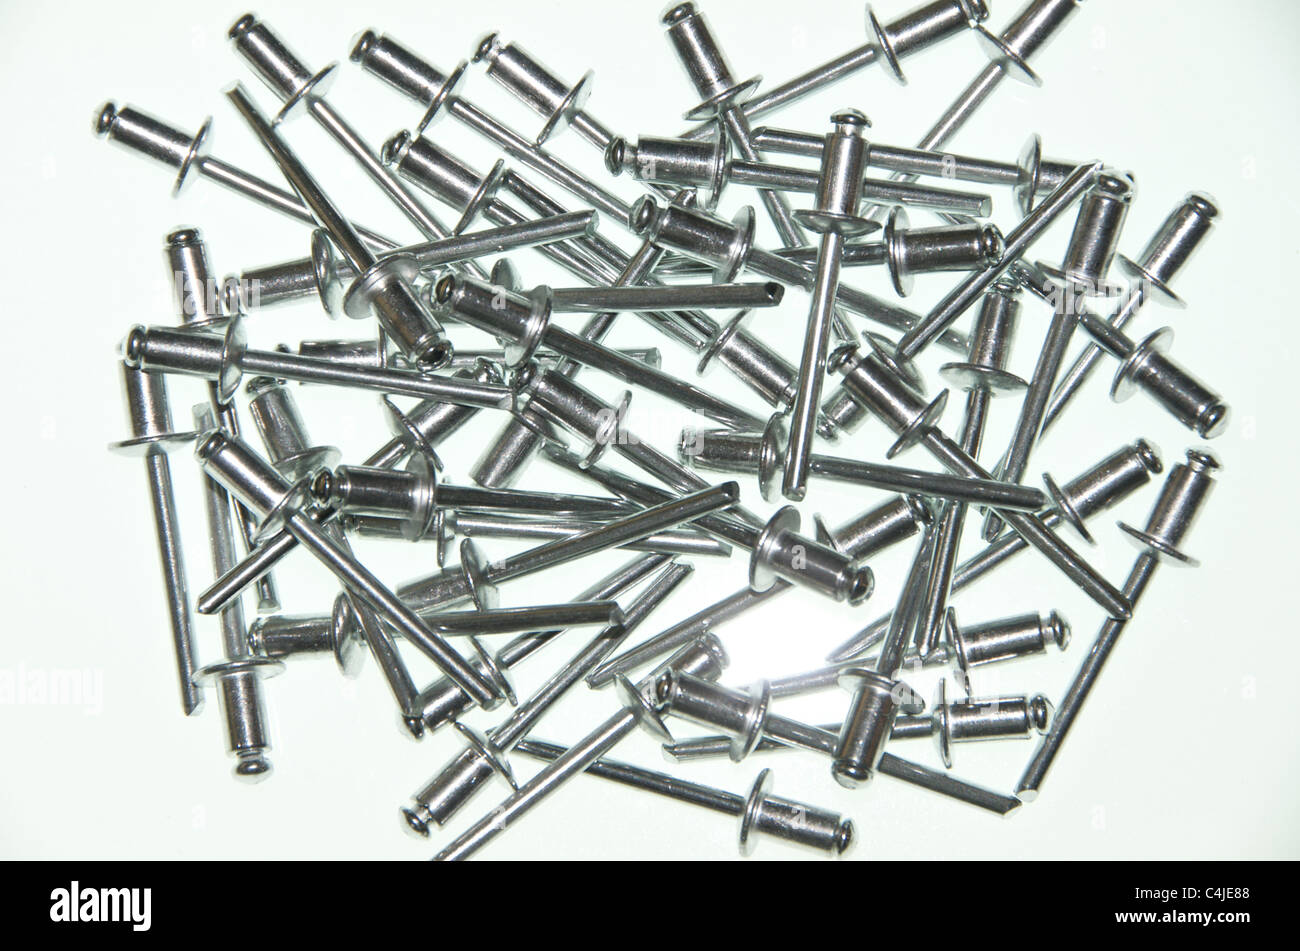 Pop rivets for metal fabrication Stock Photo